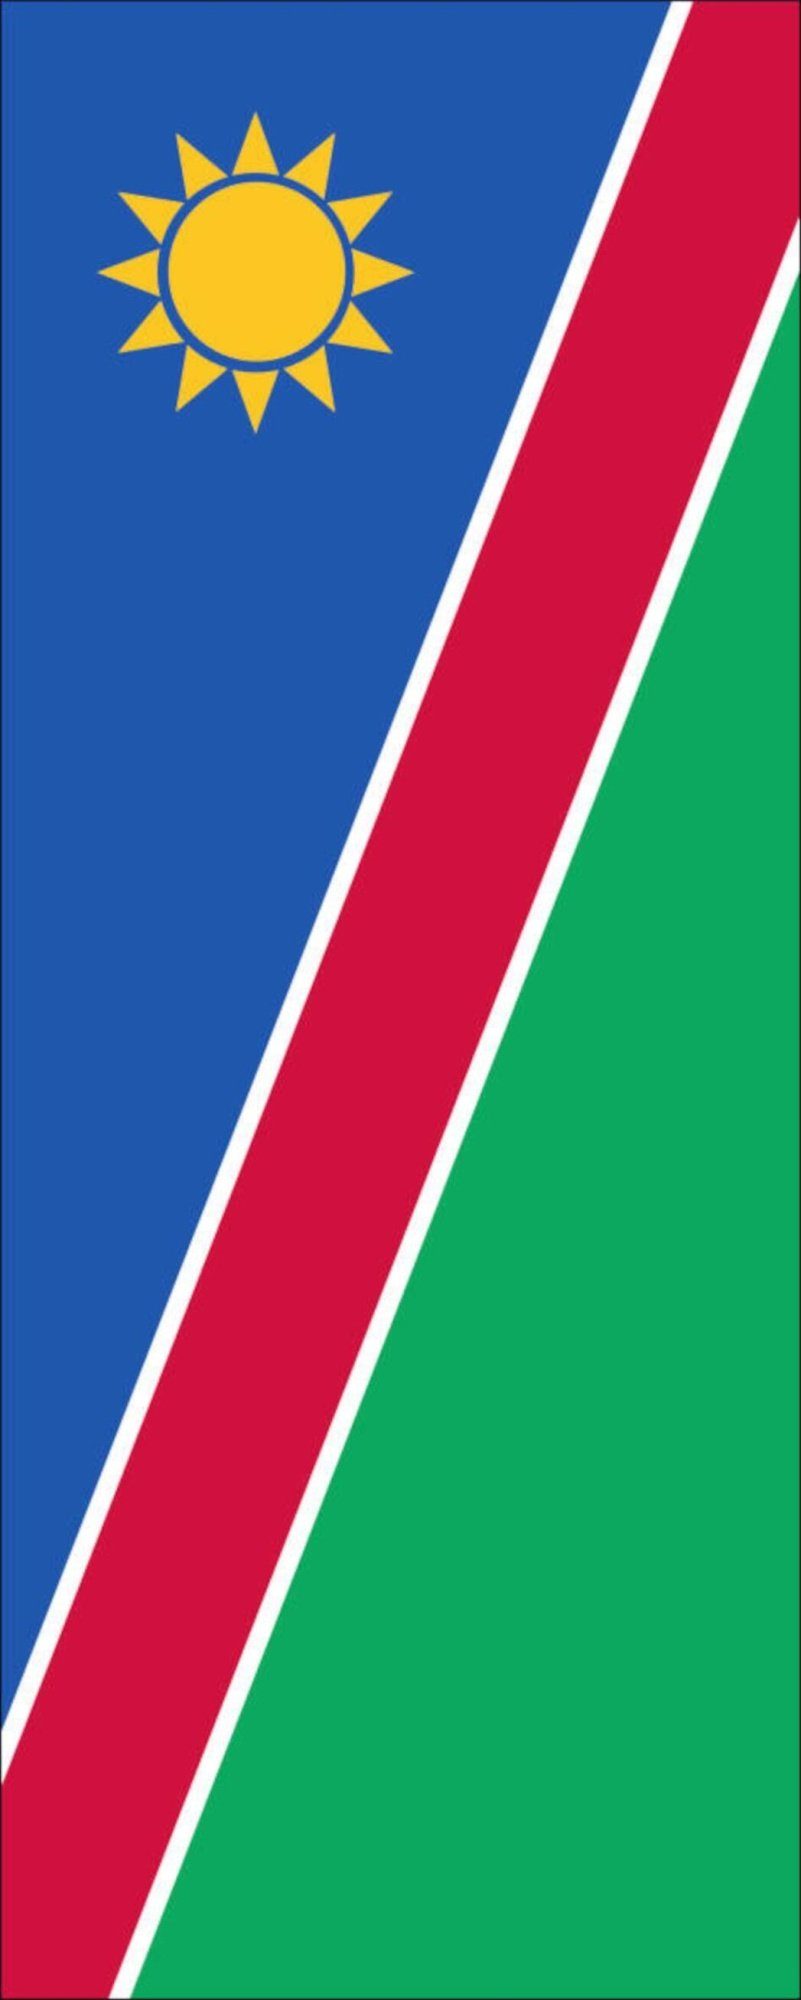 flaggenmeer Flagge Flagge Namibia 110 g/m² Hochformat